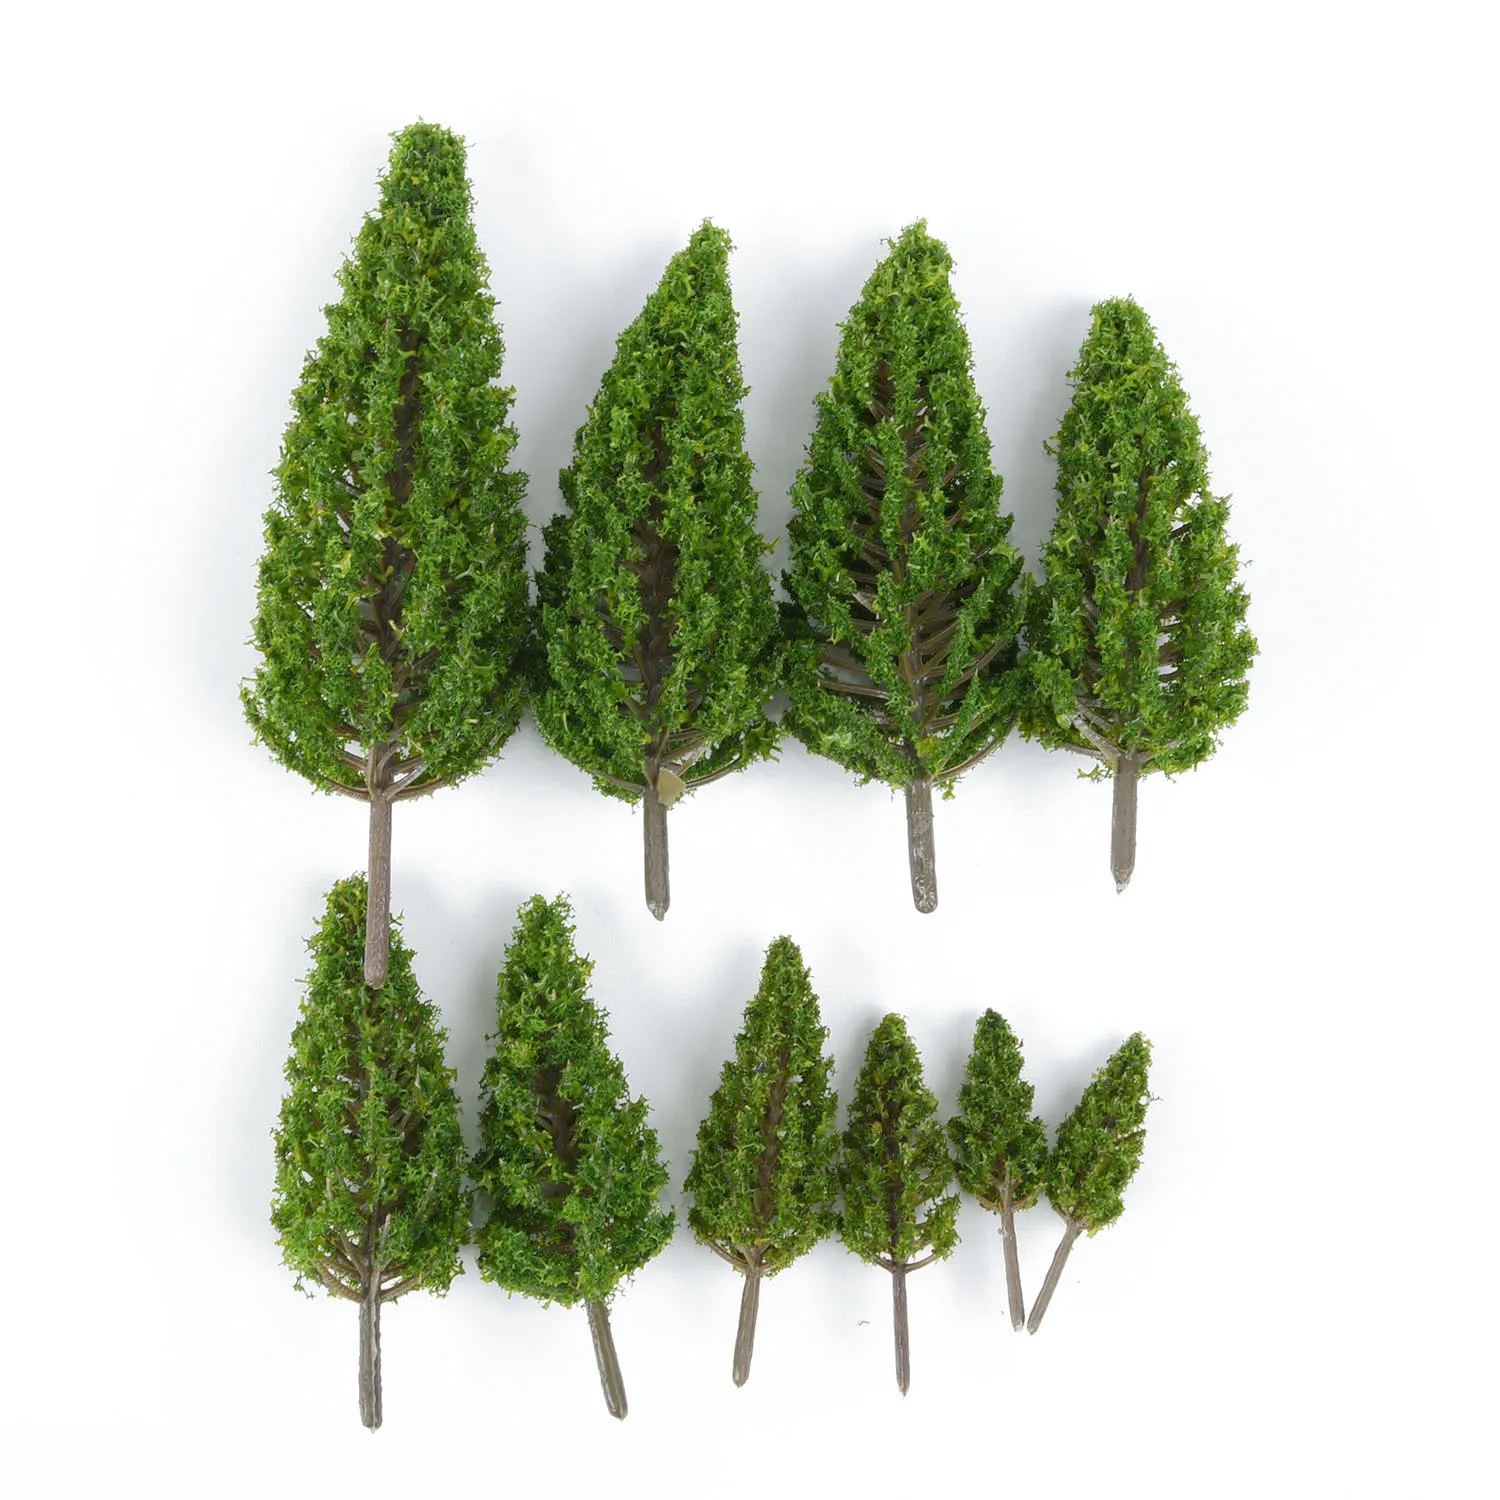 20pc 1/50-1/400 Mixed Model Trees Train Railway Forest Scenery Layout 5-16cmTrain Railways Park Street Accessories